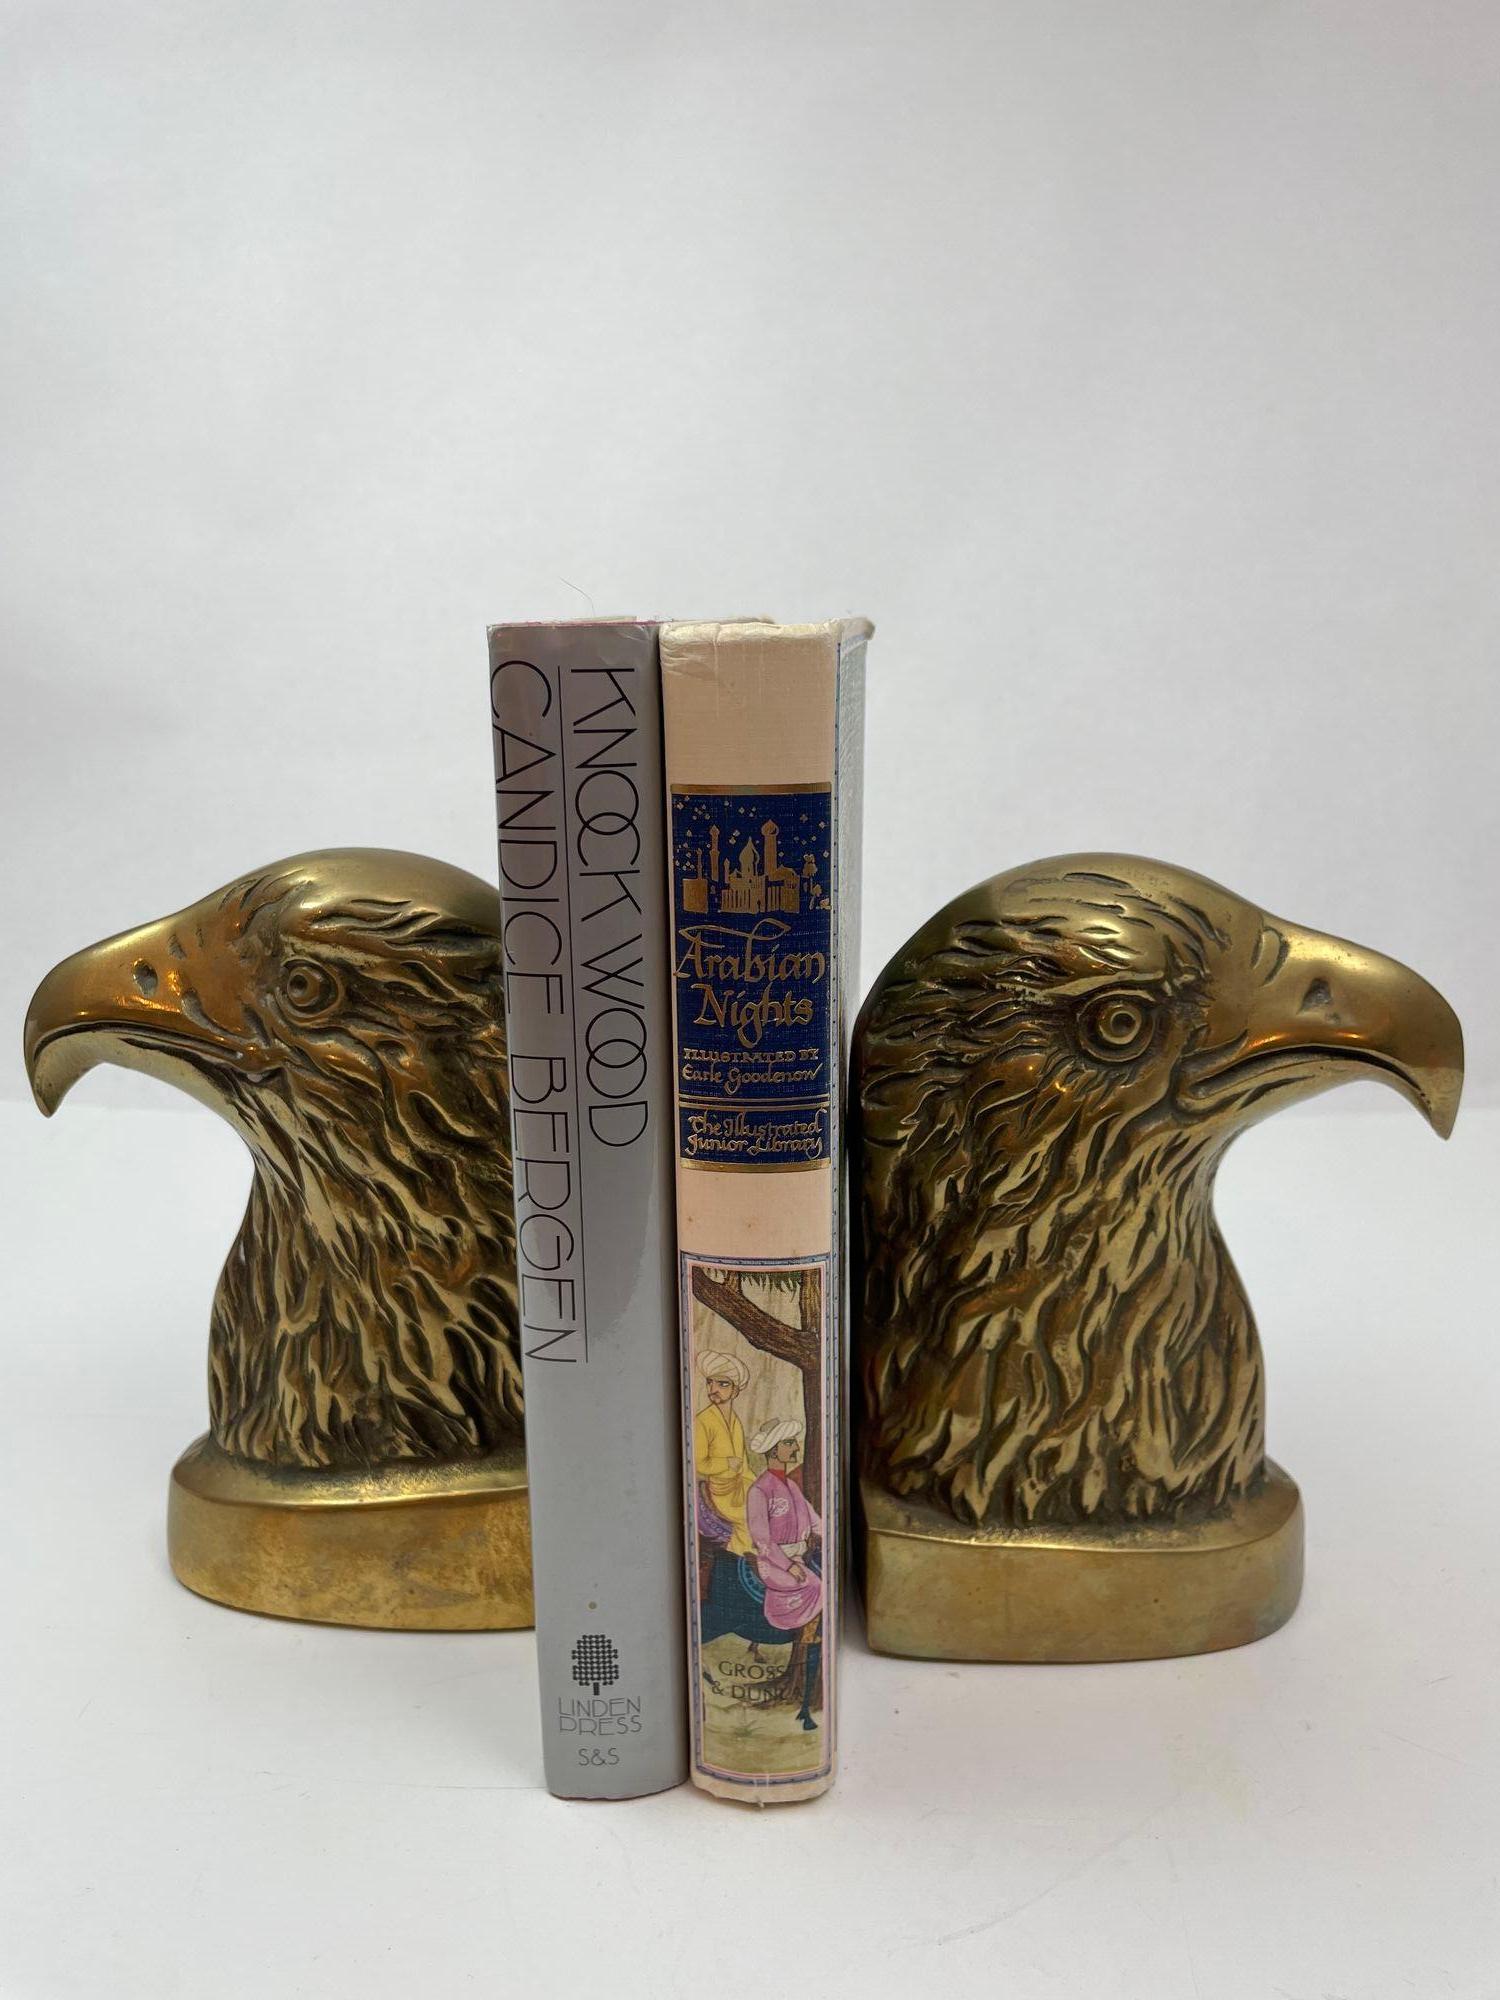 Vintage American Bald Eagle Brass Bookends a Pair For Sale 7